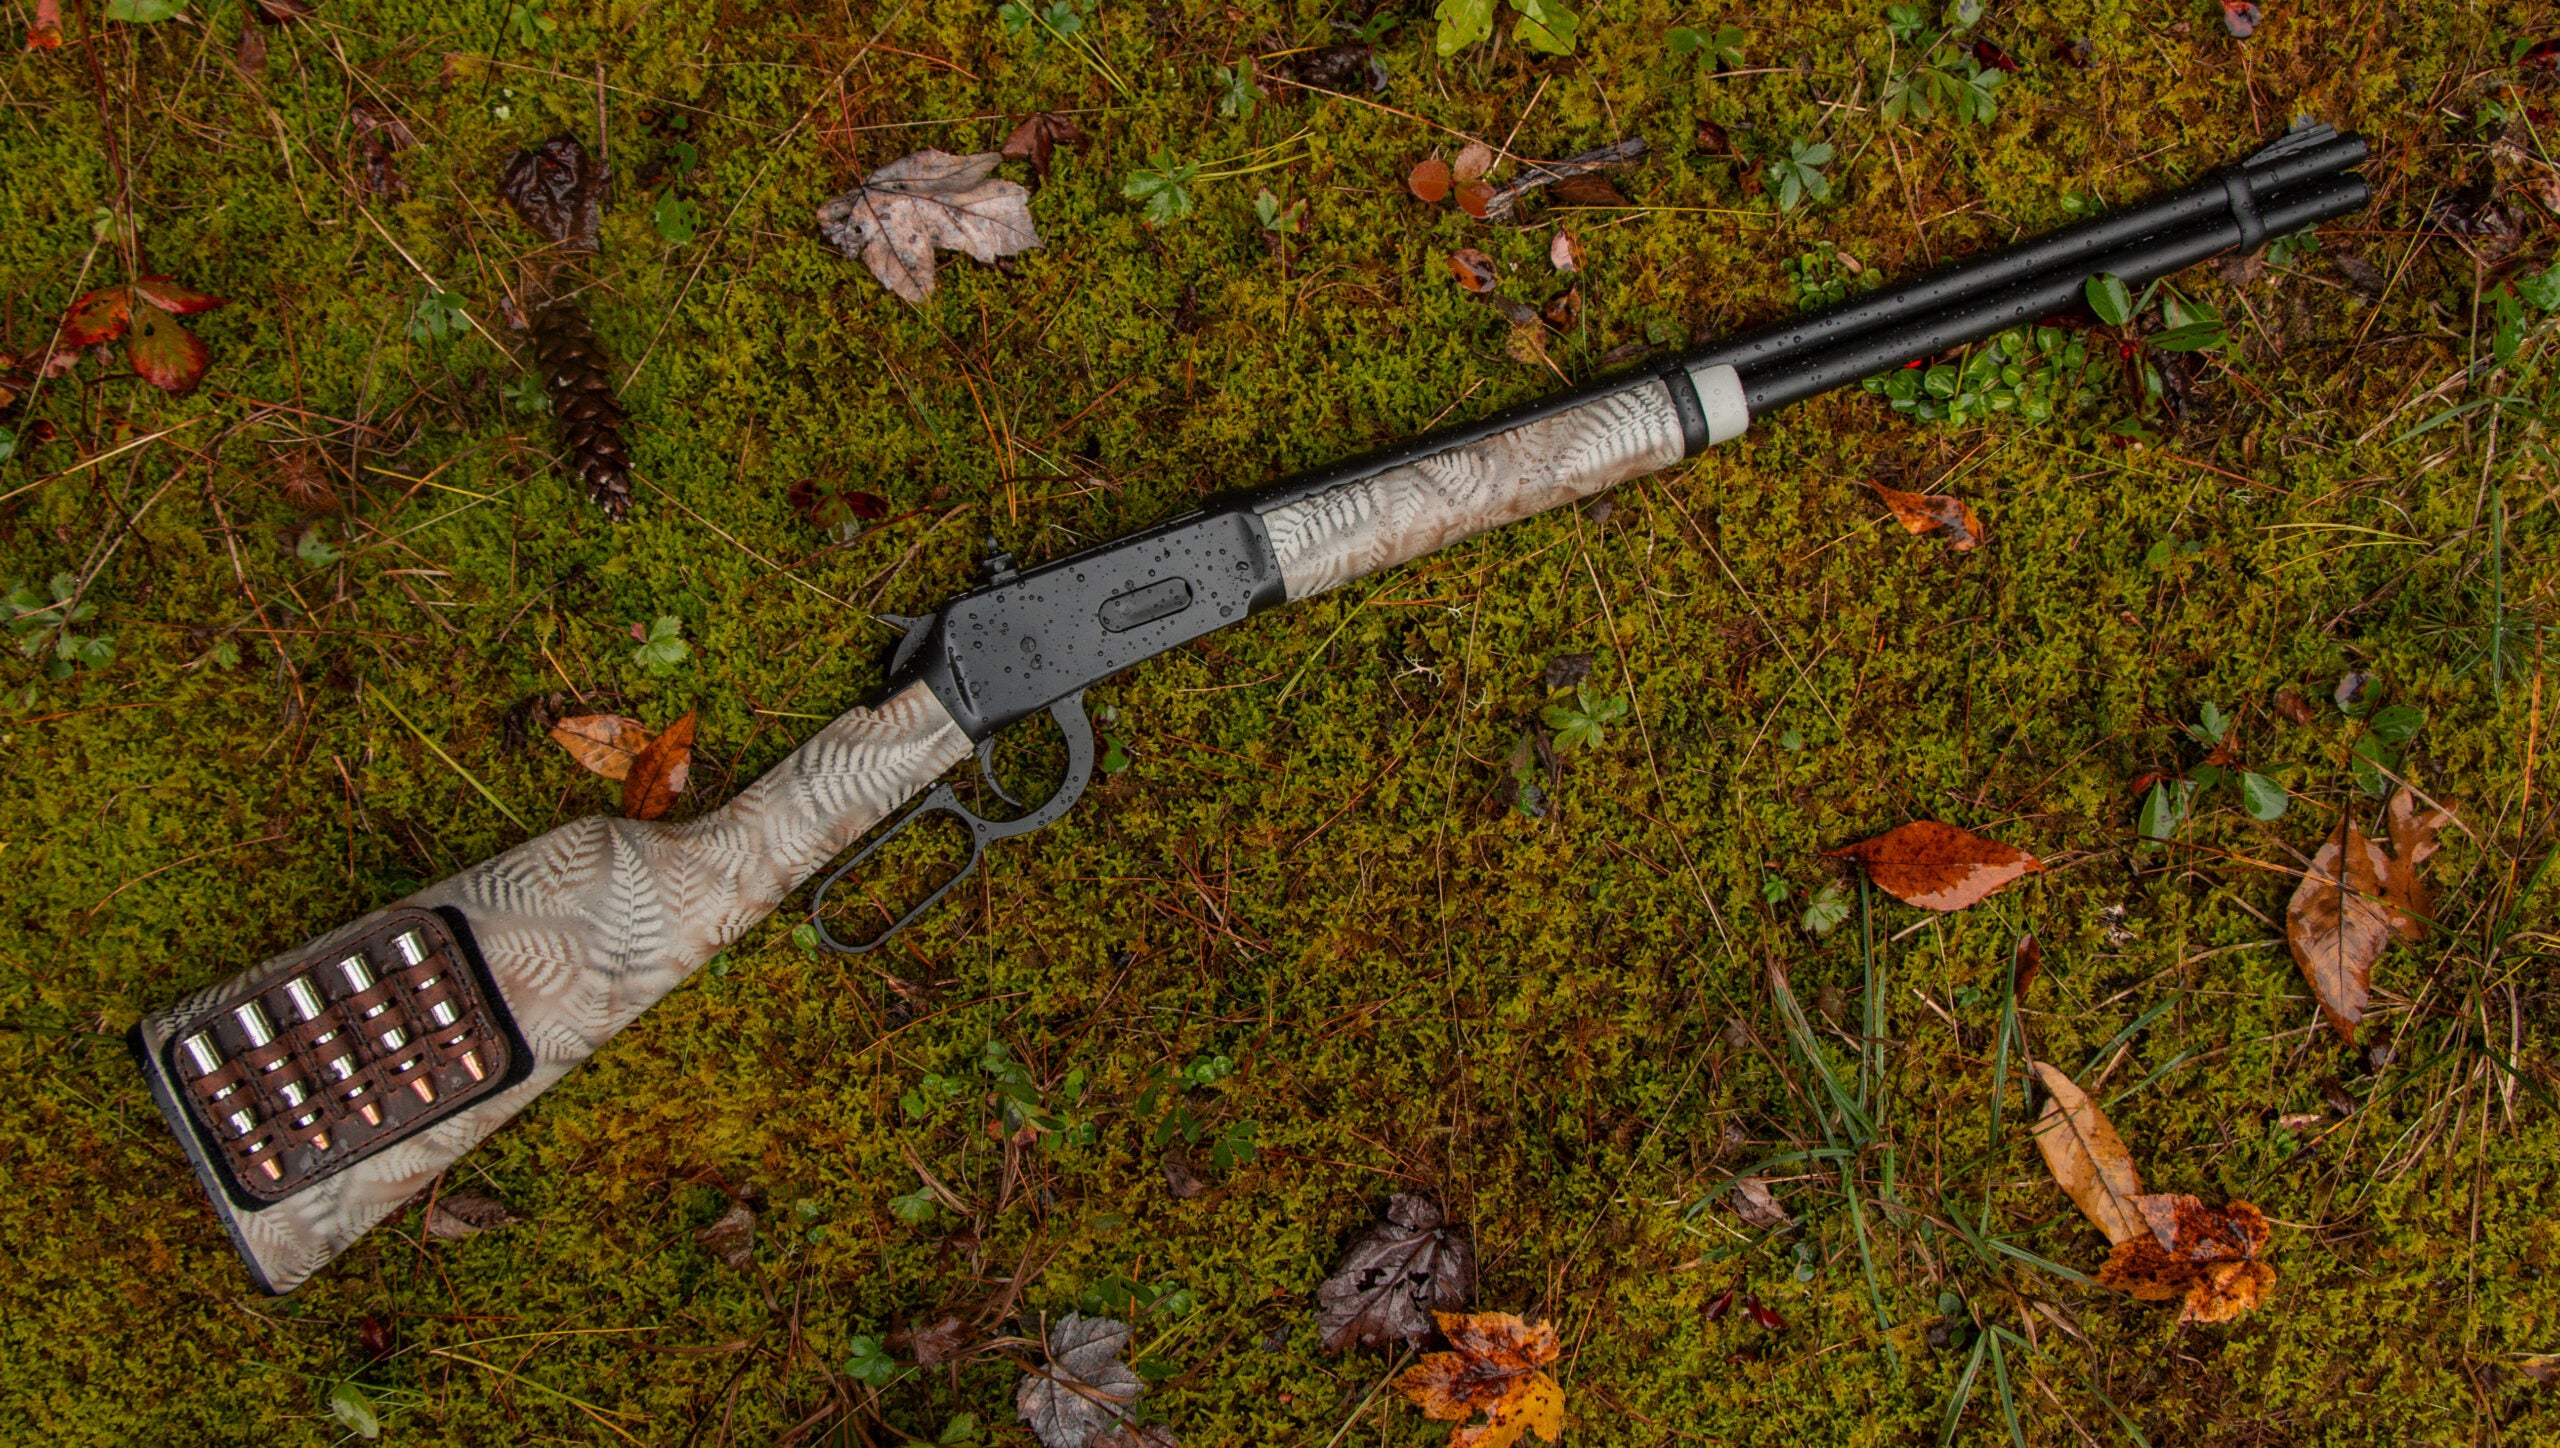 5 Of The Best Lever-Action Rifle Options Available Today (2020)